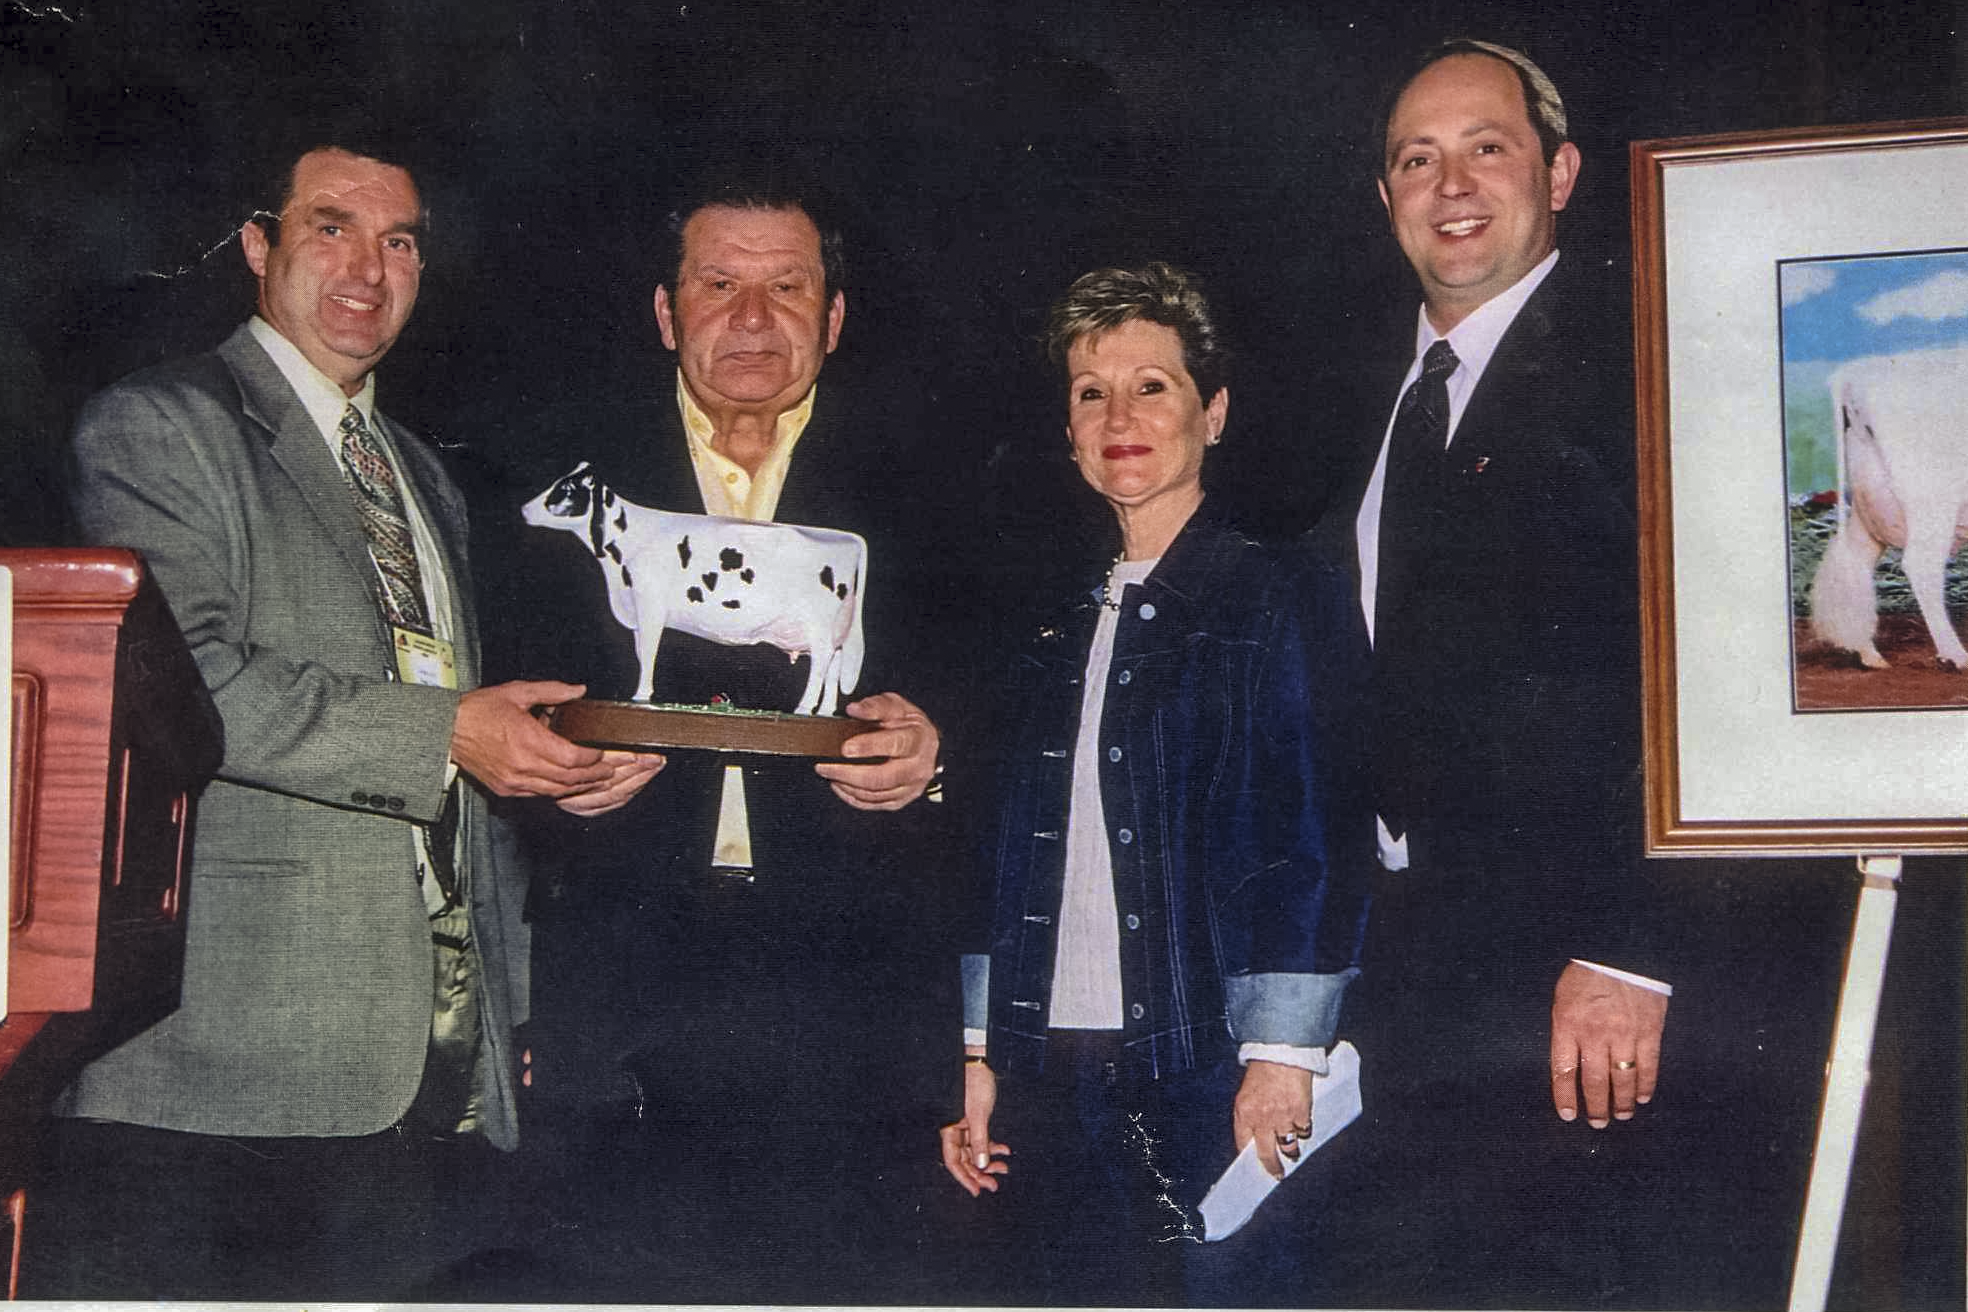 2002 Cow of the year award presentation 